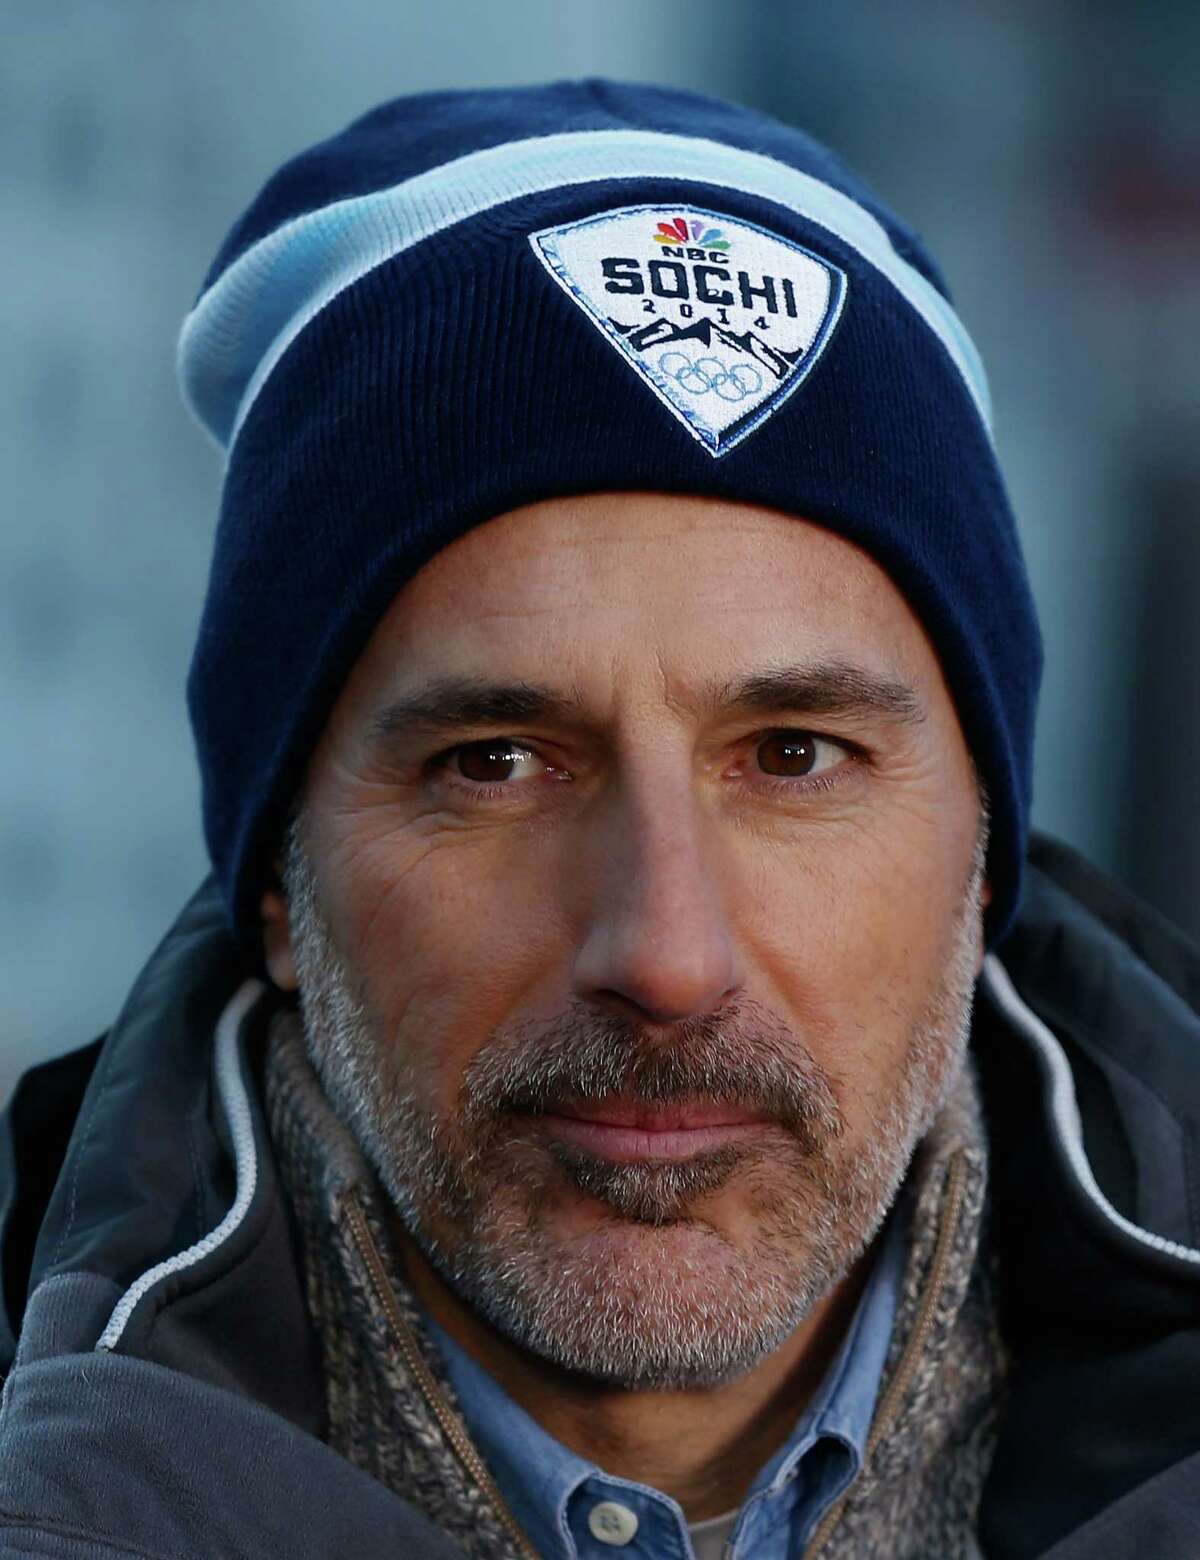 FILE - NOVEMBER 29, 2017: According to reports, NBC has fired Today Show host Matt Lauer over allegations of sexual misconduct. Sources have reported that the allegations stem from an incident at the 2014 Sochi Olympics. SOCHI, RUSSIA - FEBRUARY 06: (BROADCAST-OUT) Matt Lauer reports for the NBC TODAY Show in the Rosa Khutor Mountain Village ahead of the Sochi 2014 Winter Olympics on February 6, 2014 in Sochi, Russia. (Photo by Scott Halleran/Getty Images) ORG XMIT: 690205271